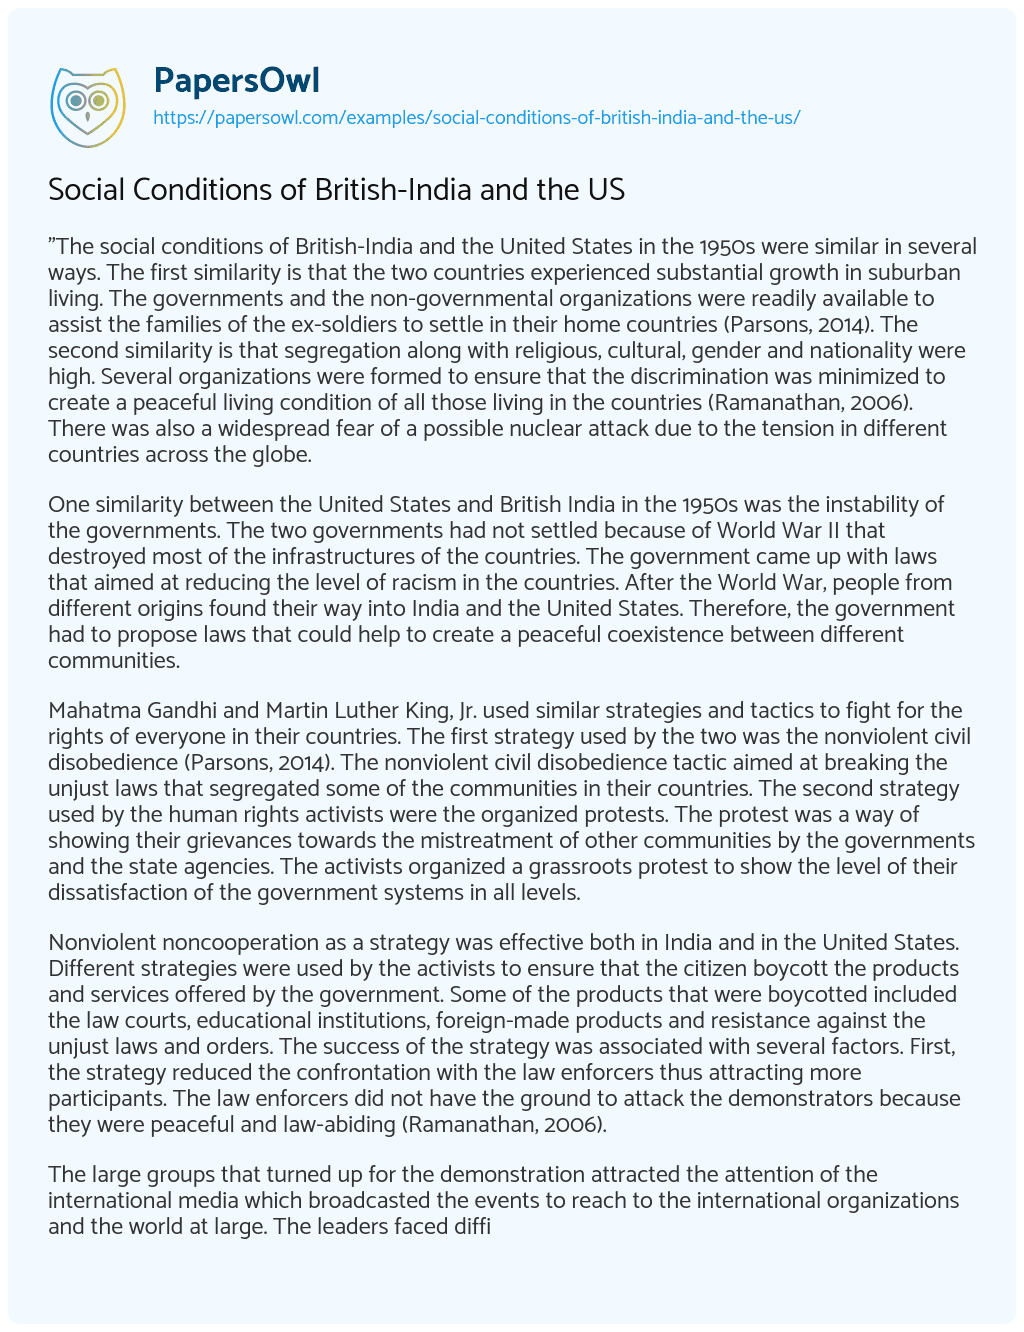 Essay on Social Conditions of British-India and the US